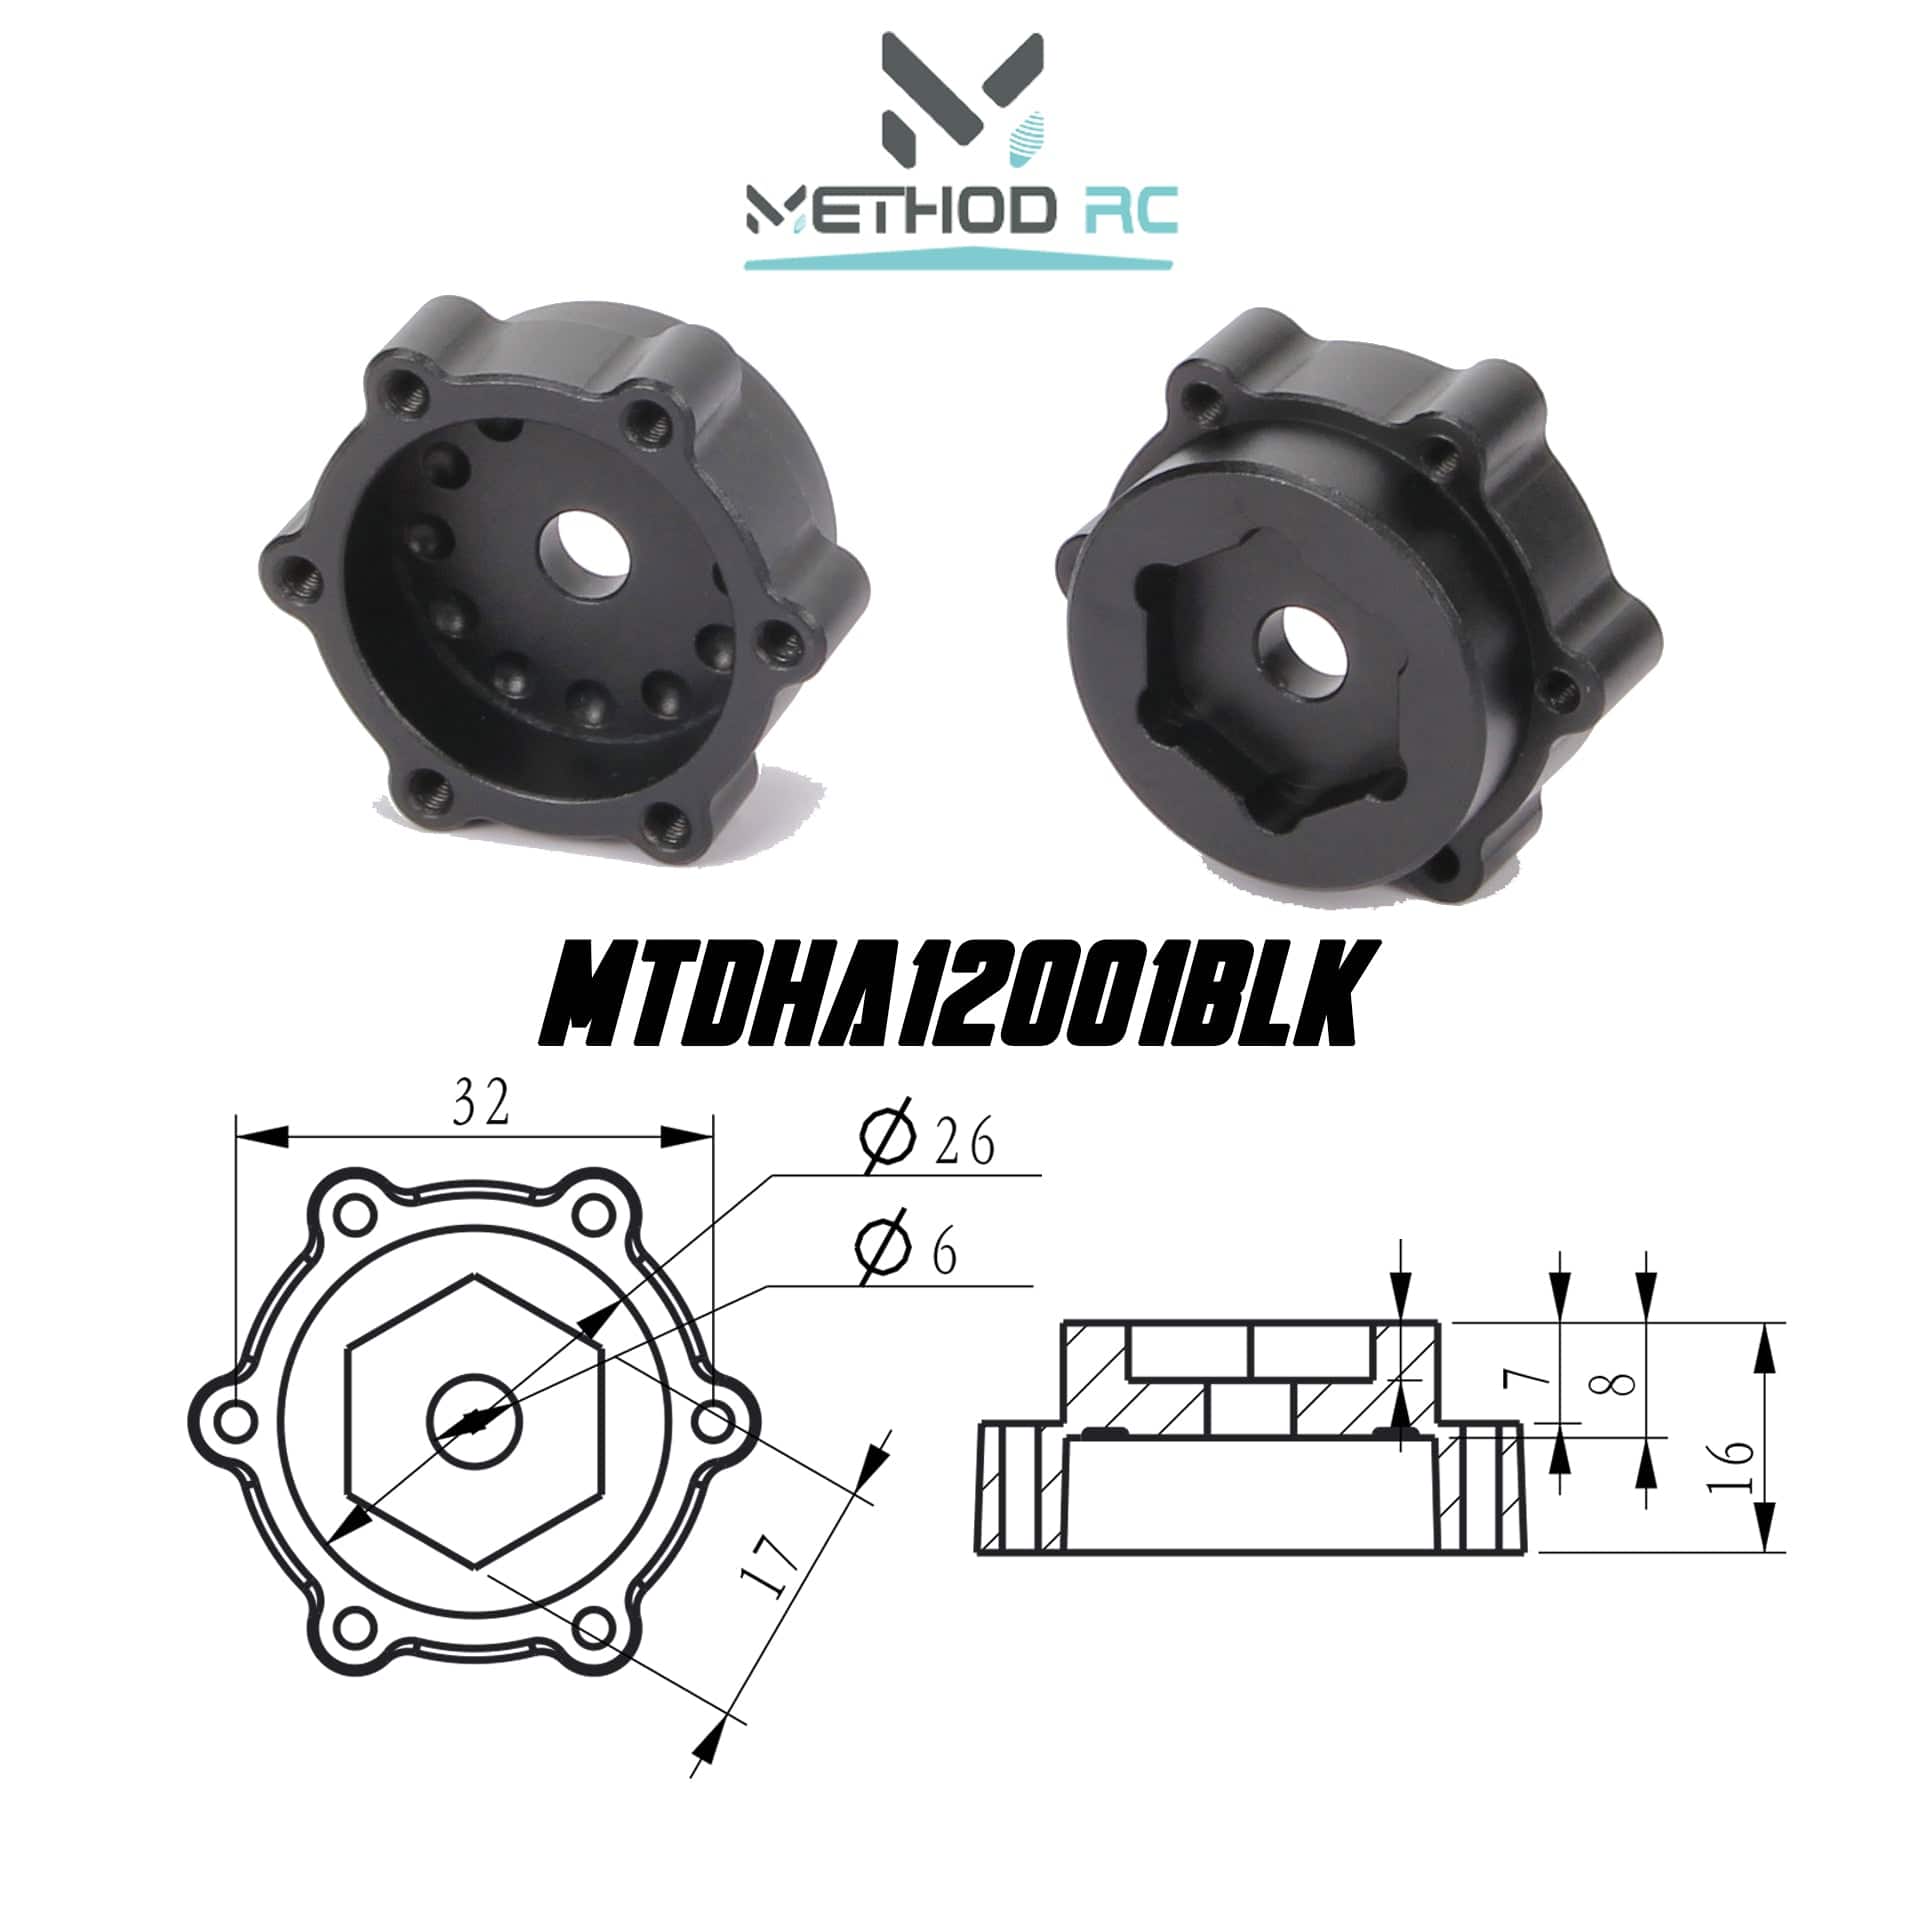 Method RC Wheel Hexes Black 6 x 32mm / 12mm Offset Hex Adaptor for use with Traxxas UDR (2pcs)